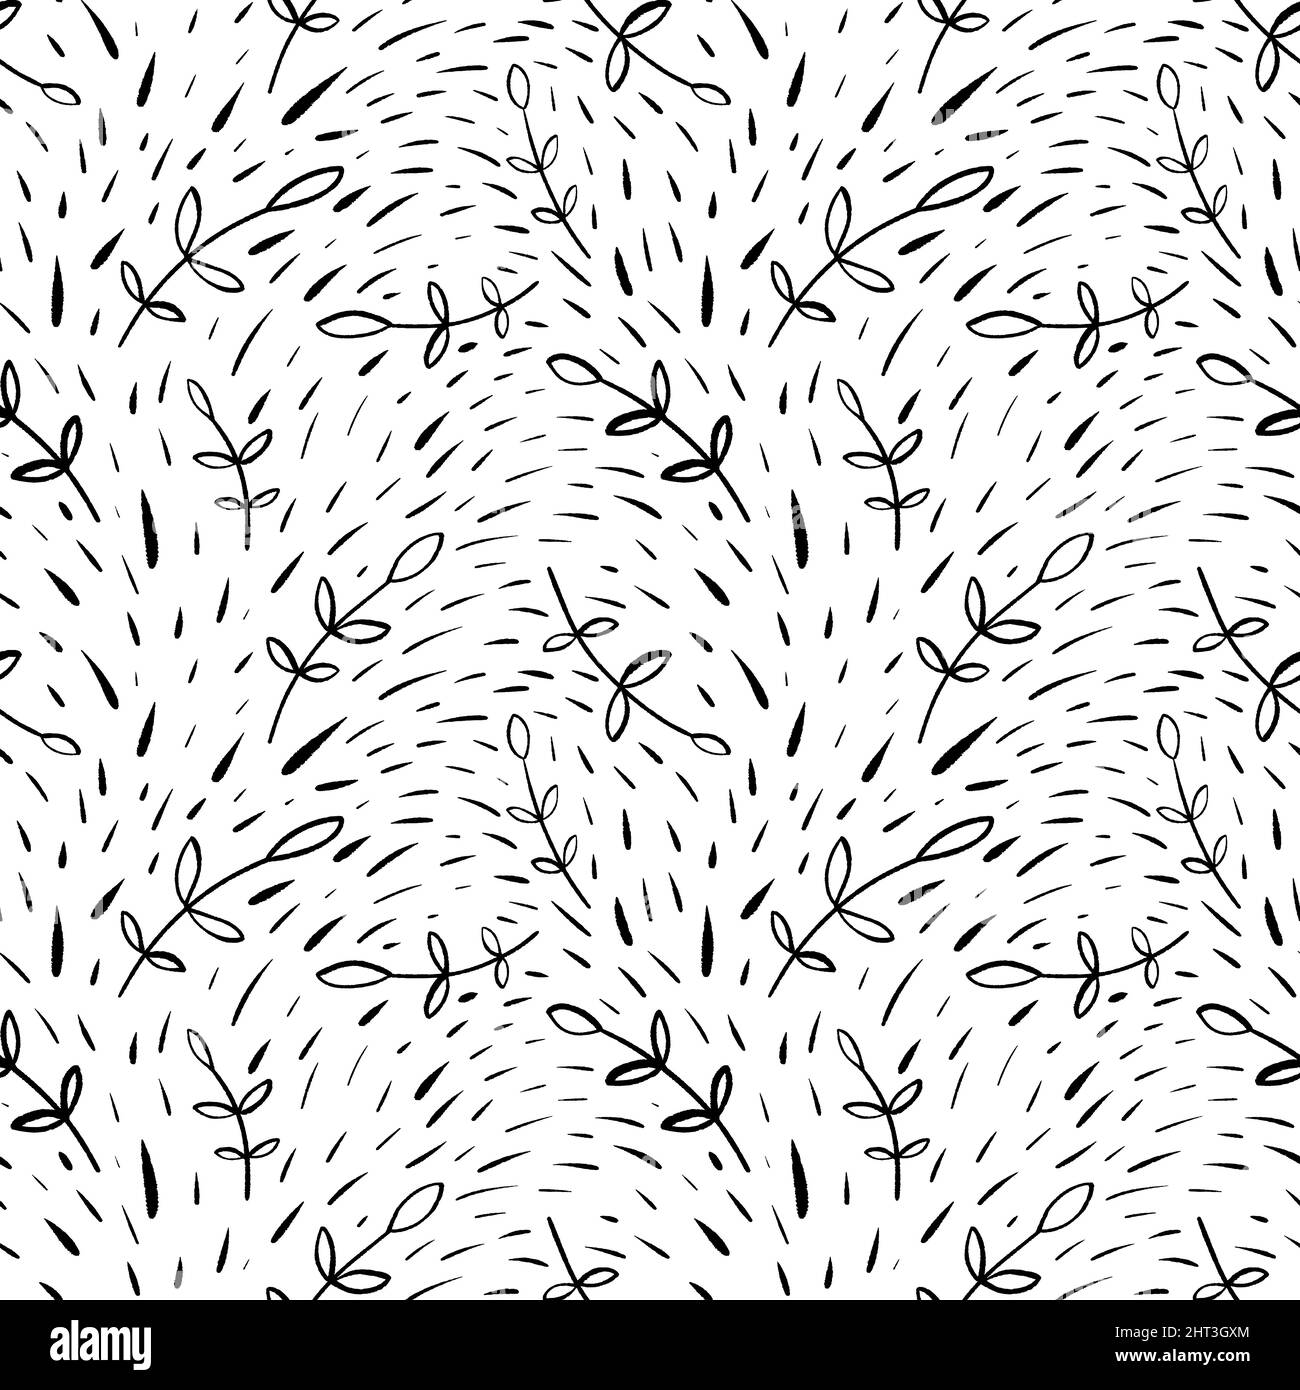 hand drawn branches with leaves seamless pattern of abstract botanical elements. Stock Vector